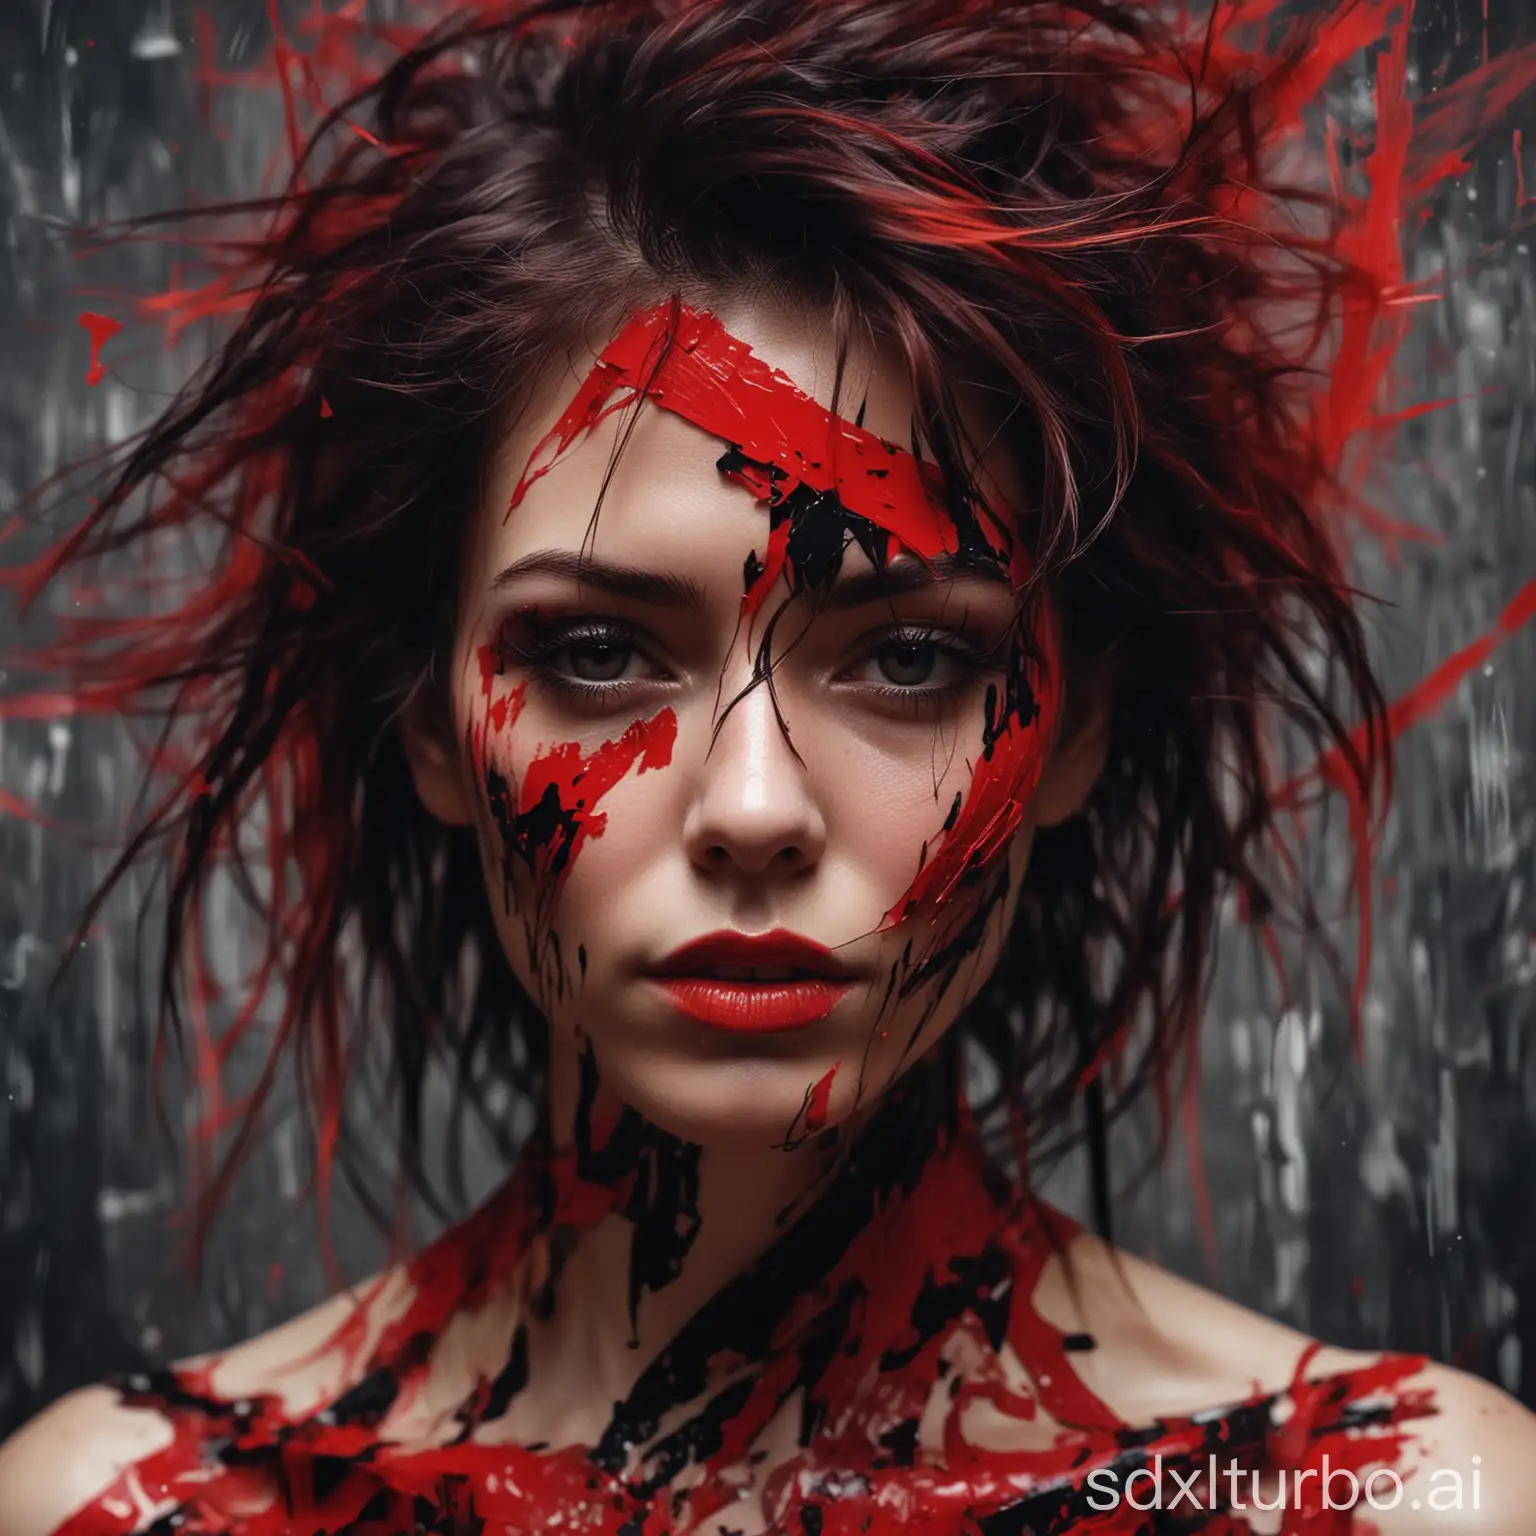 abstract female portrait,undefined hair,red and black color palette,blurred boundaries,upper body,fragmented visual style,evokes feelings of rebellion and passion,